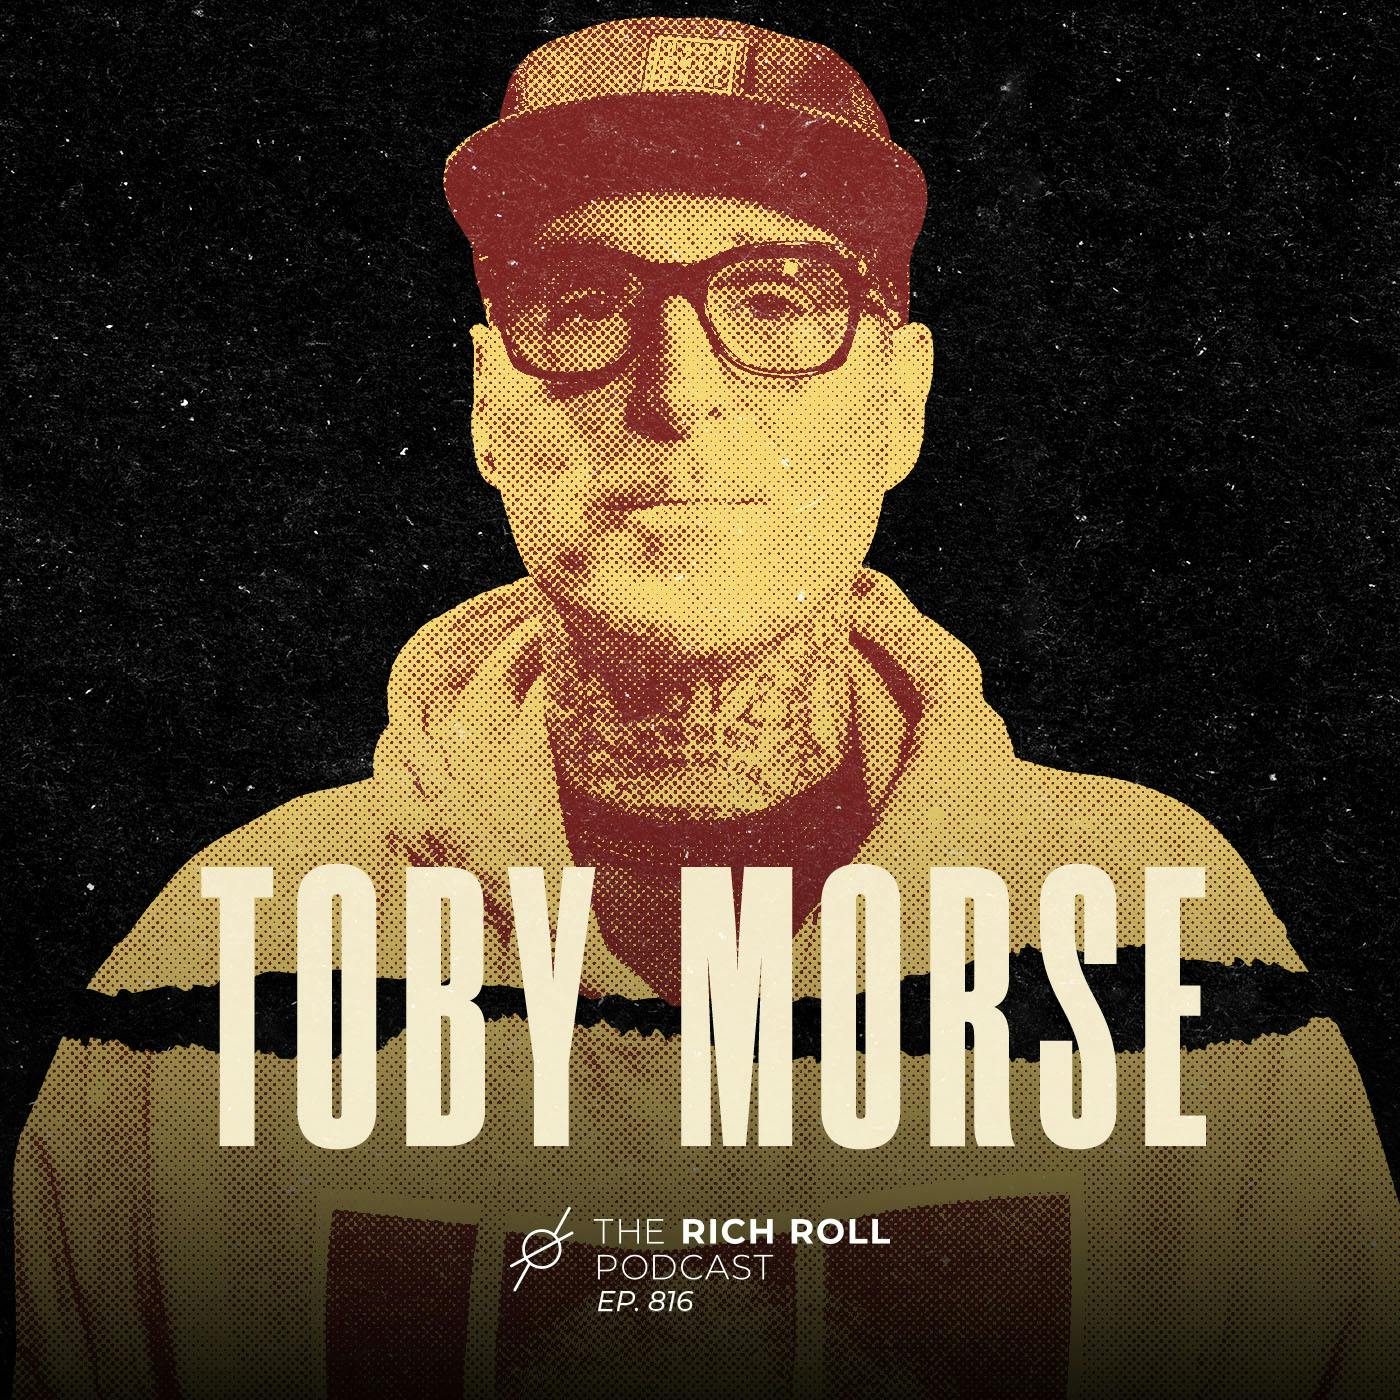 Straight Edge For Life: Punk Icon Toby Morse On Positivity, Parenting & Plant-Based Living